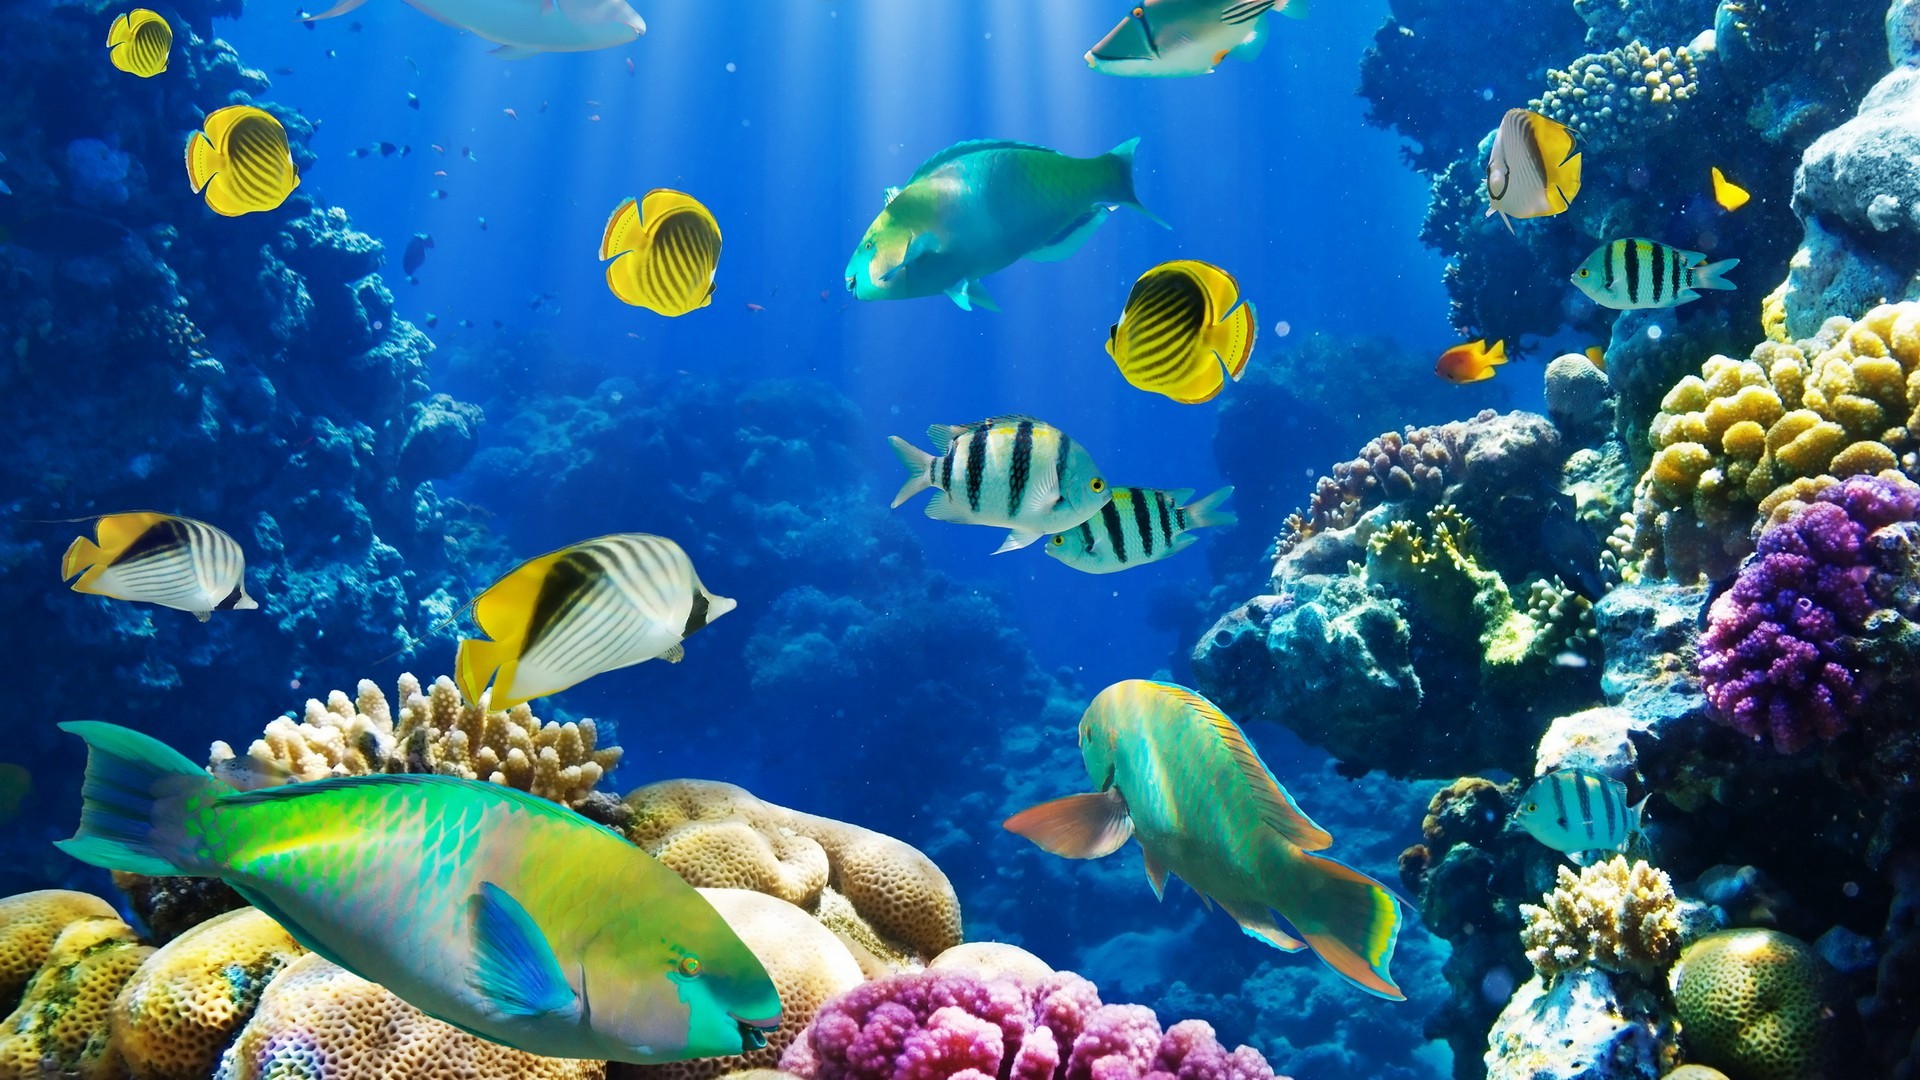 1920x1080 ... different types of life and has a very bio diverse ecosystem. It houses  fish that have qualities that could save lives through medicine. The ocean  floor ...